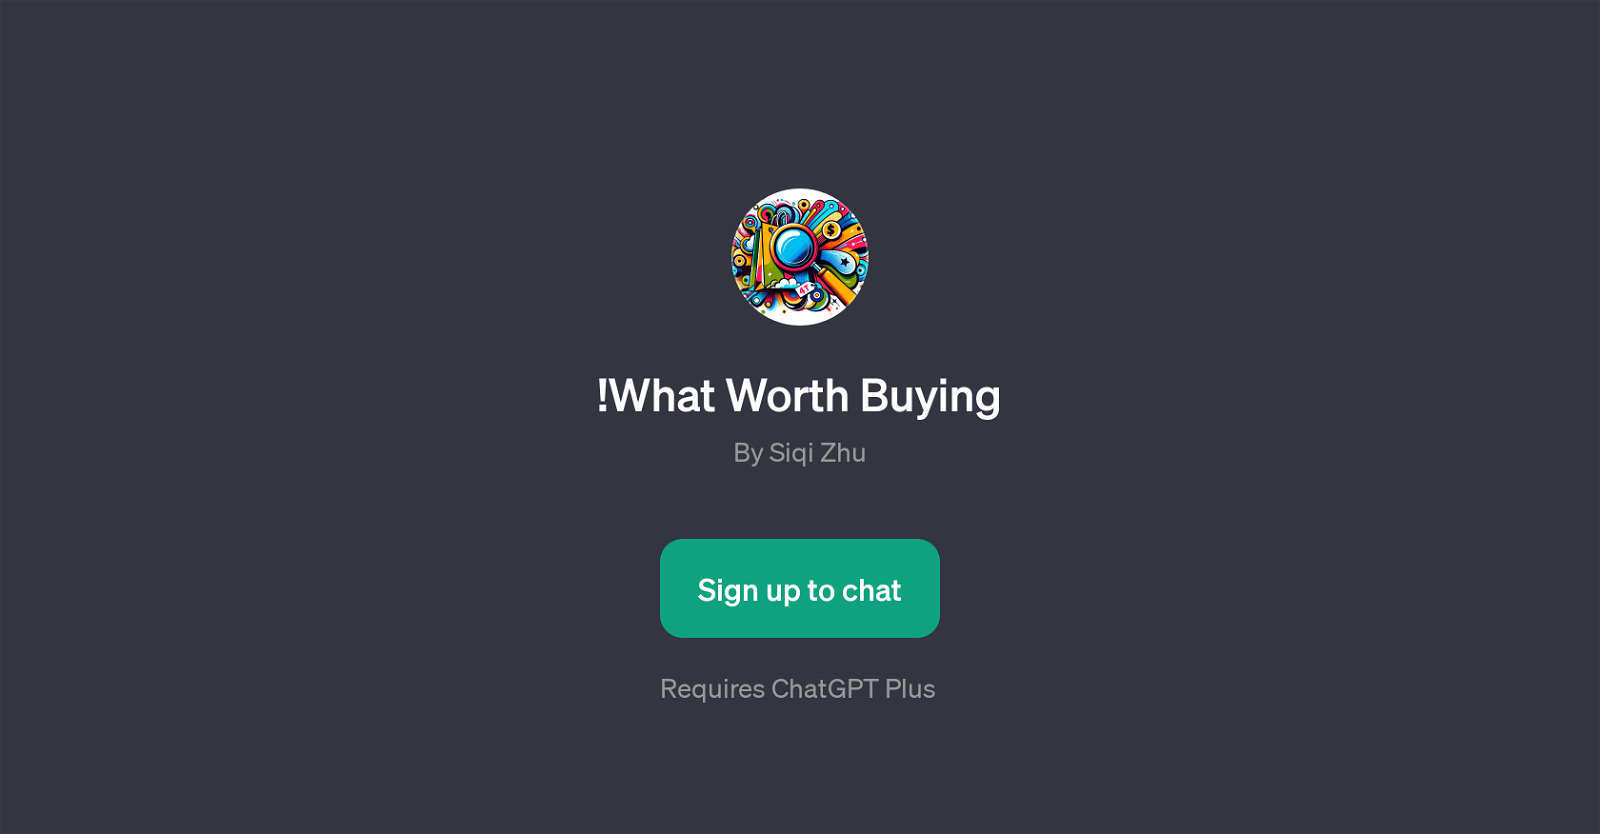 !What Worth Buying website